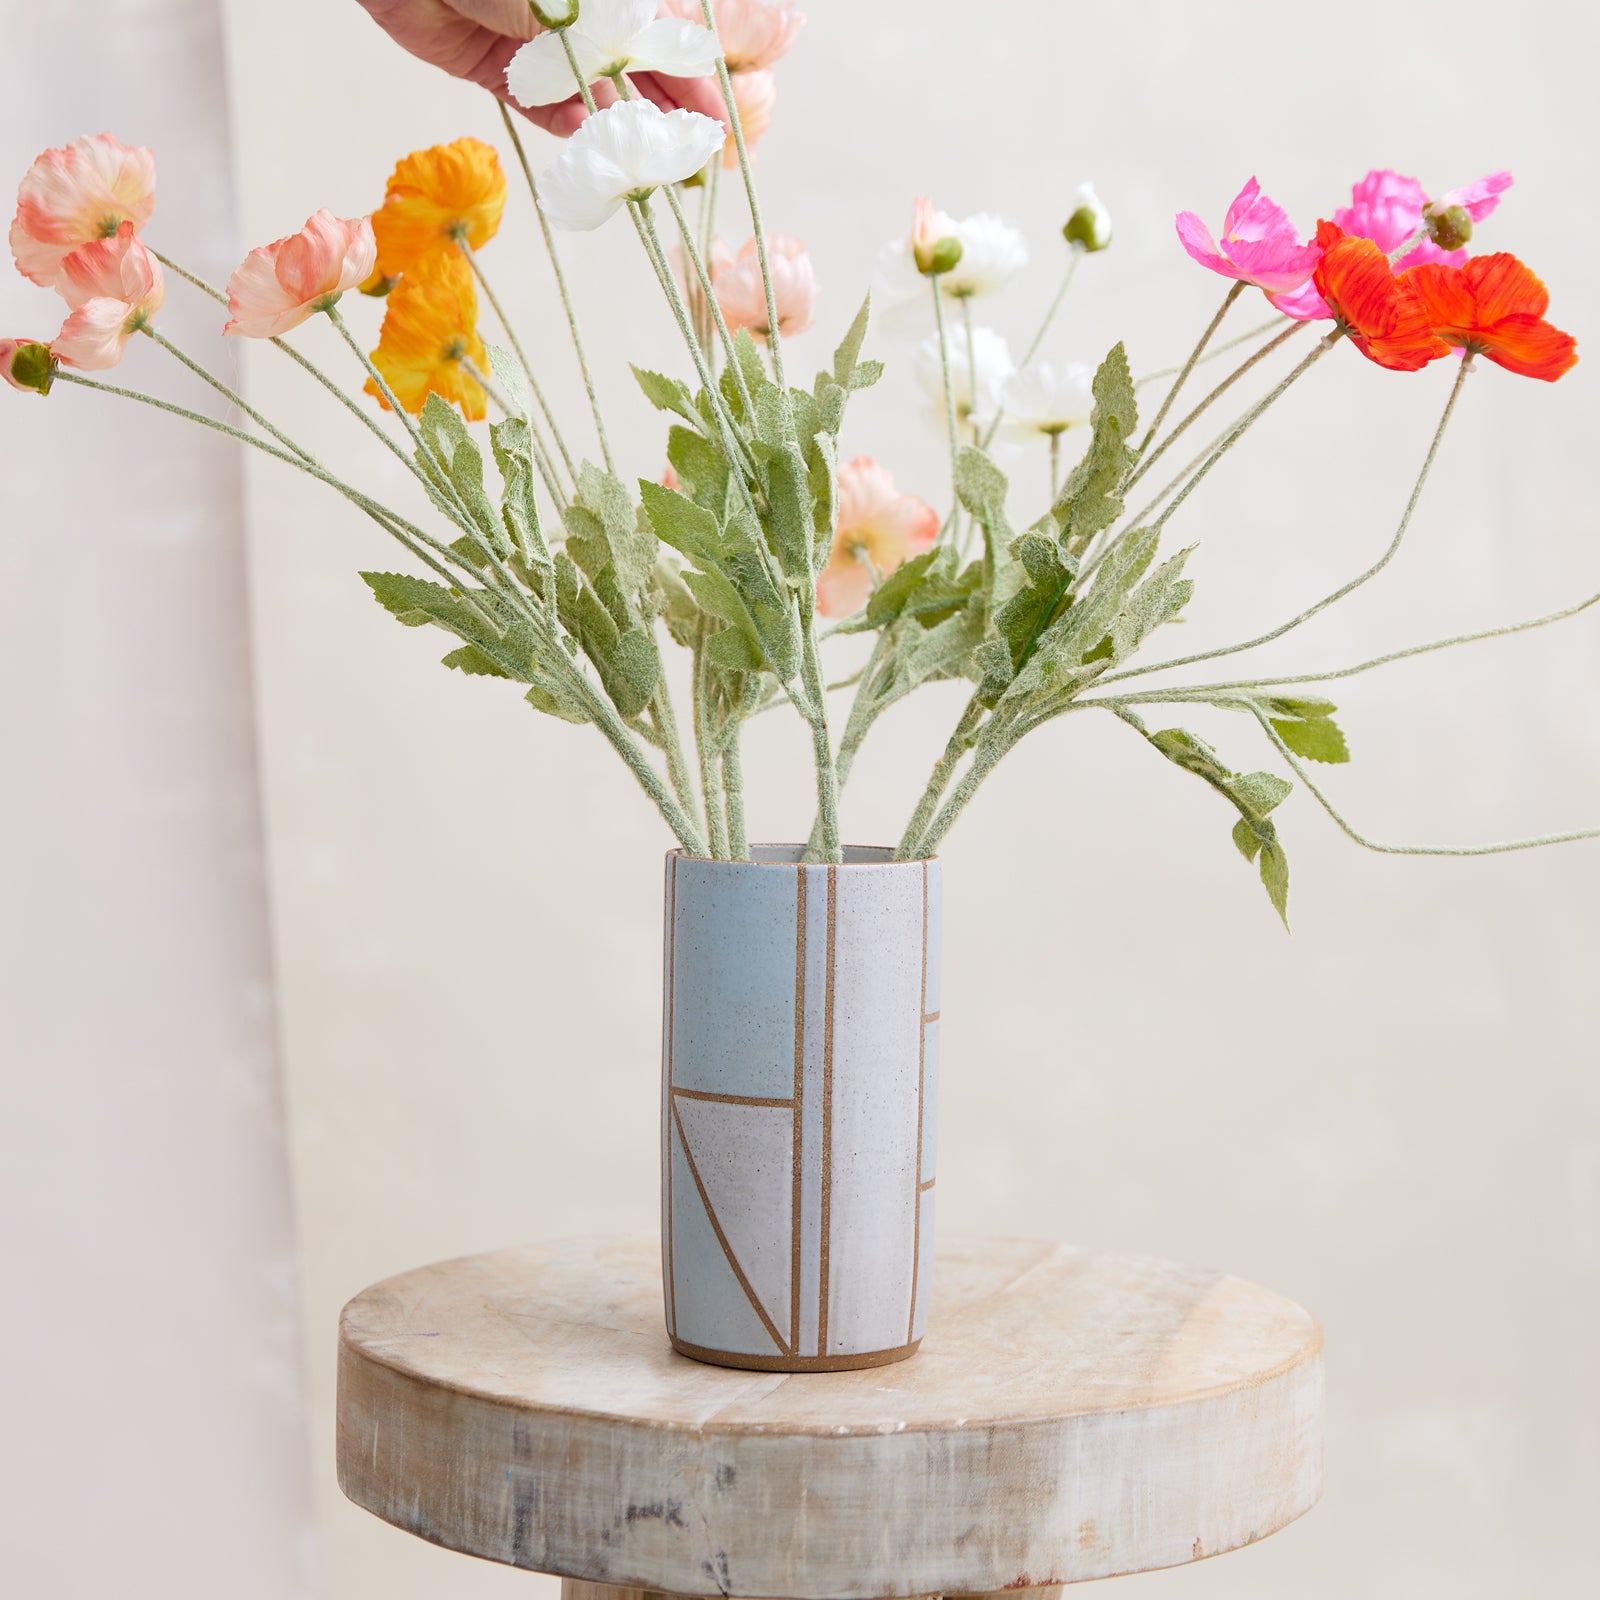 A front view of the Geometric Cylindrical Handmade Ceramic Vase in a blue, white and grey glaze. The handmade vase sits on a wooden stool in a coastal-styled setting. The ceramic vase displays fresh flowers that are being adjusted by a hand.